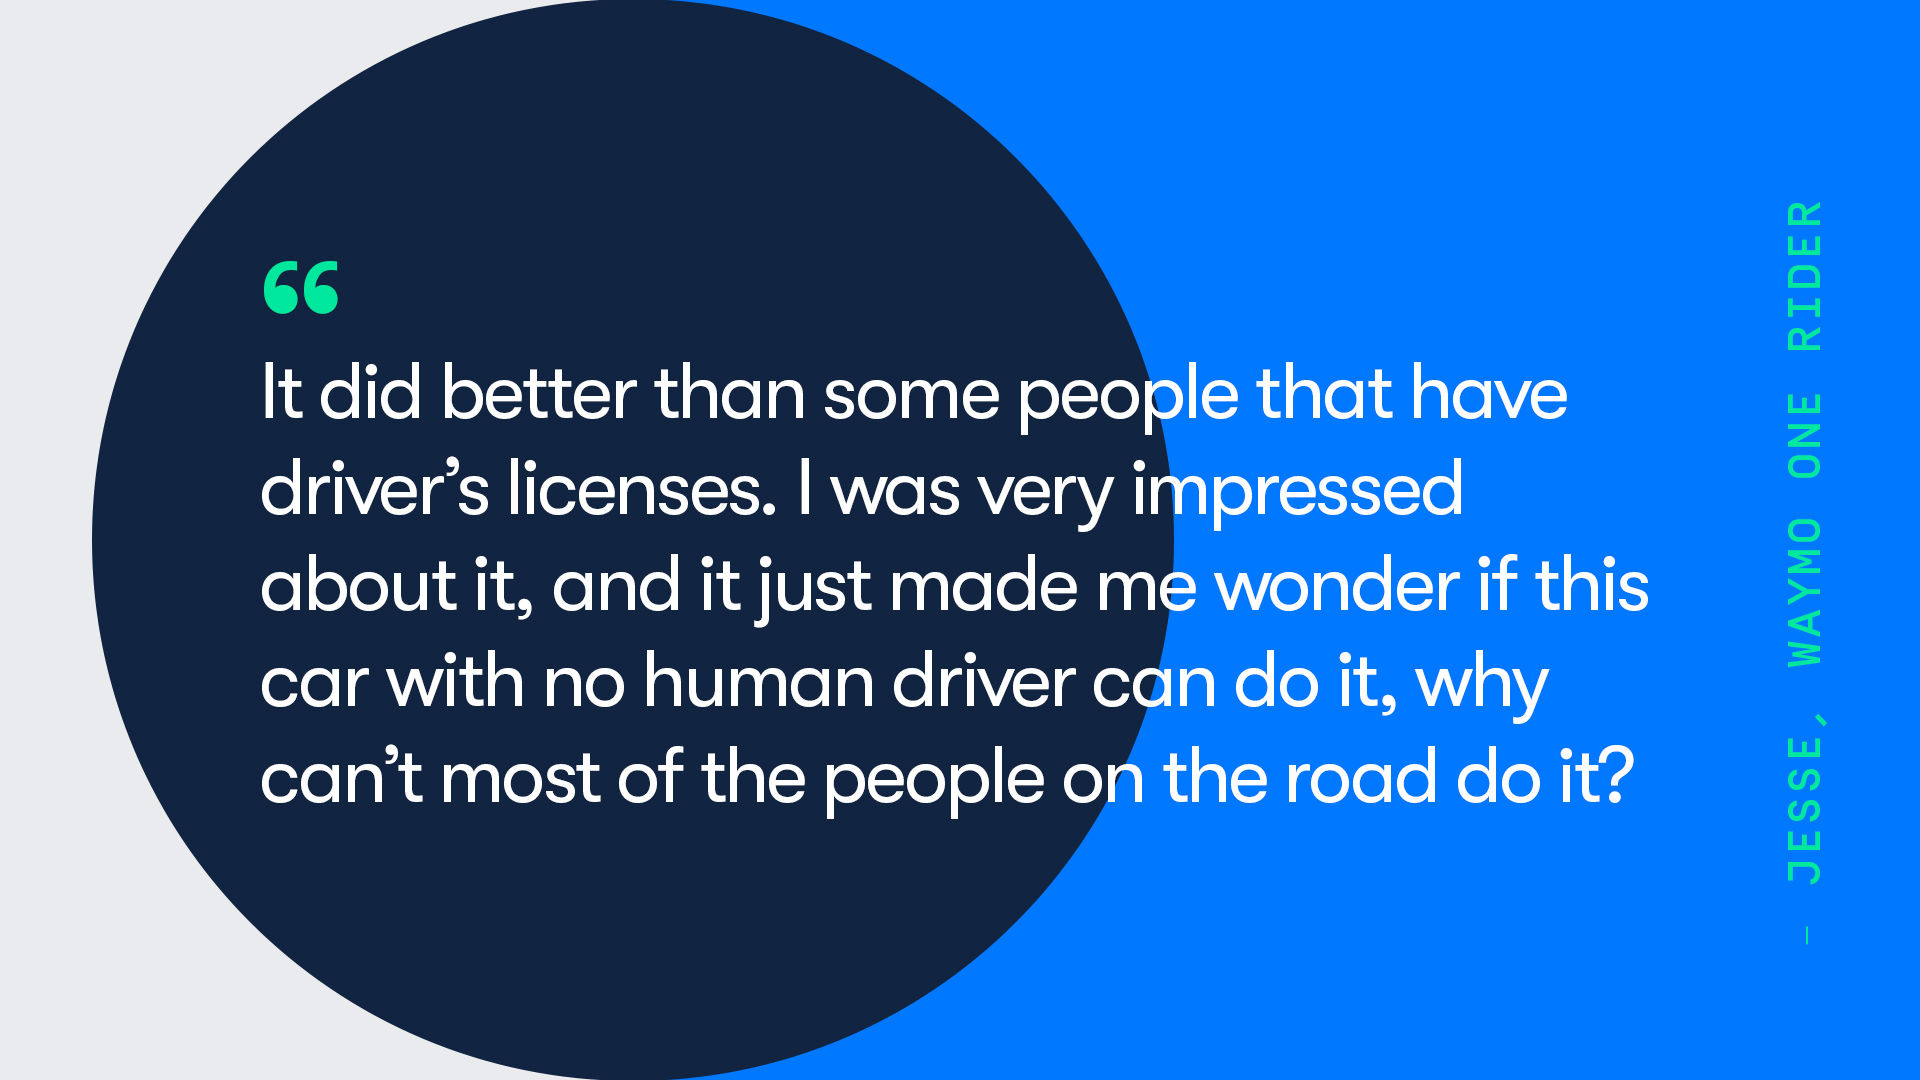 A quote from Waymo One rider, Jesse. They say that "[The Waymo Driver] did better than some people that have a driver's licenses. I was very impressed about it, and it just made me wonder if this car with no human driver can do it, why can't most of the people on the road do it?"